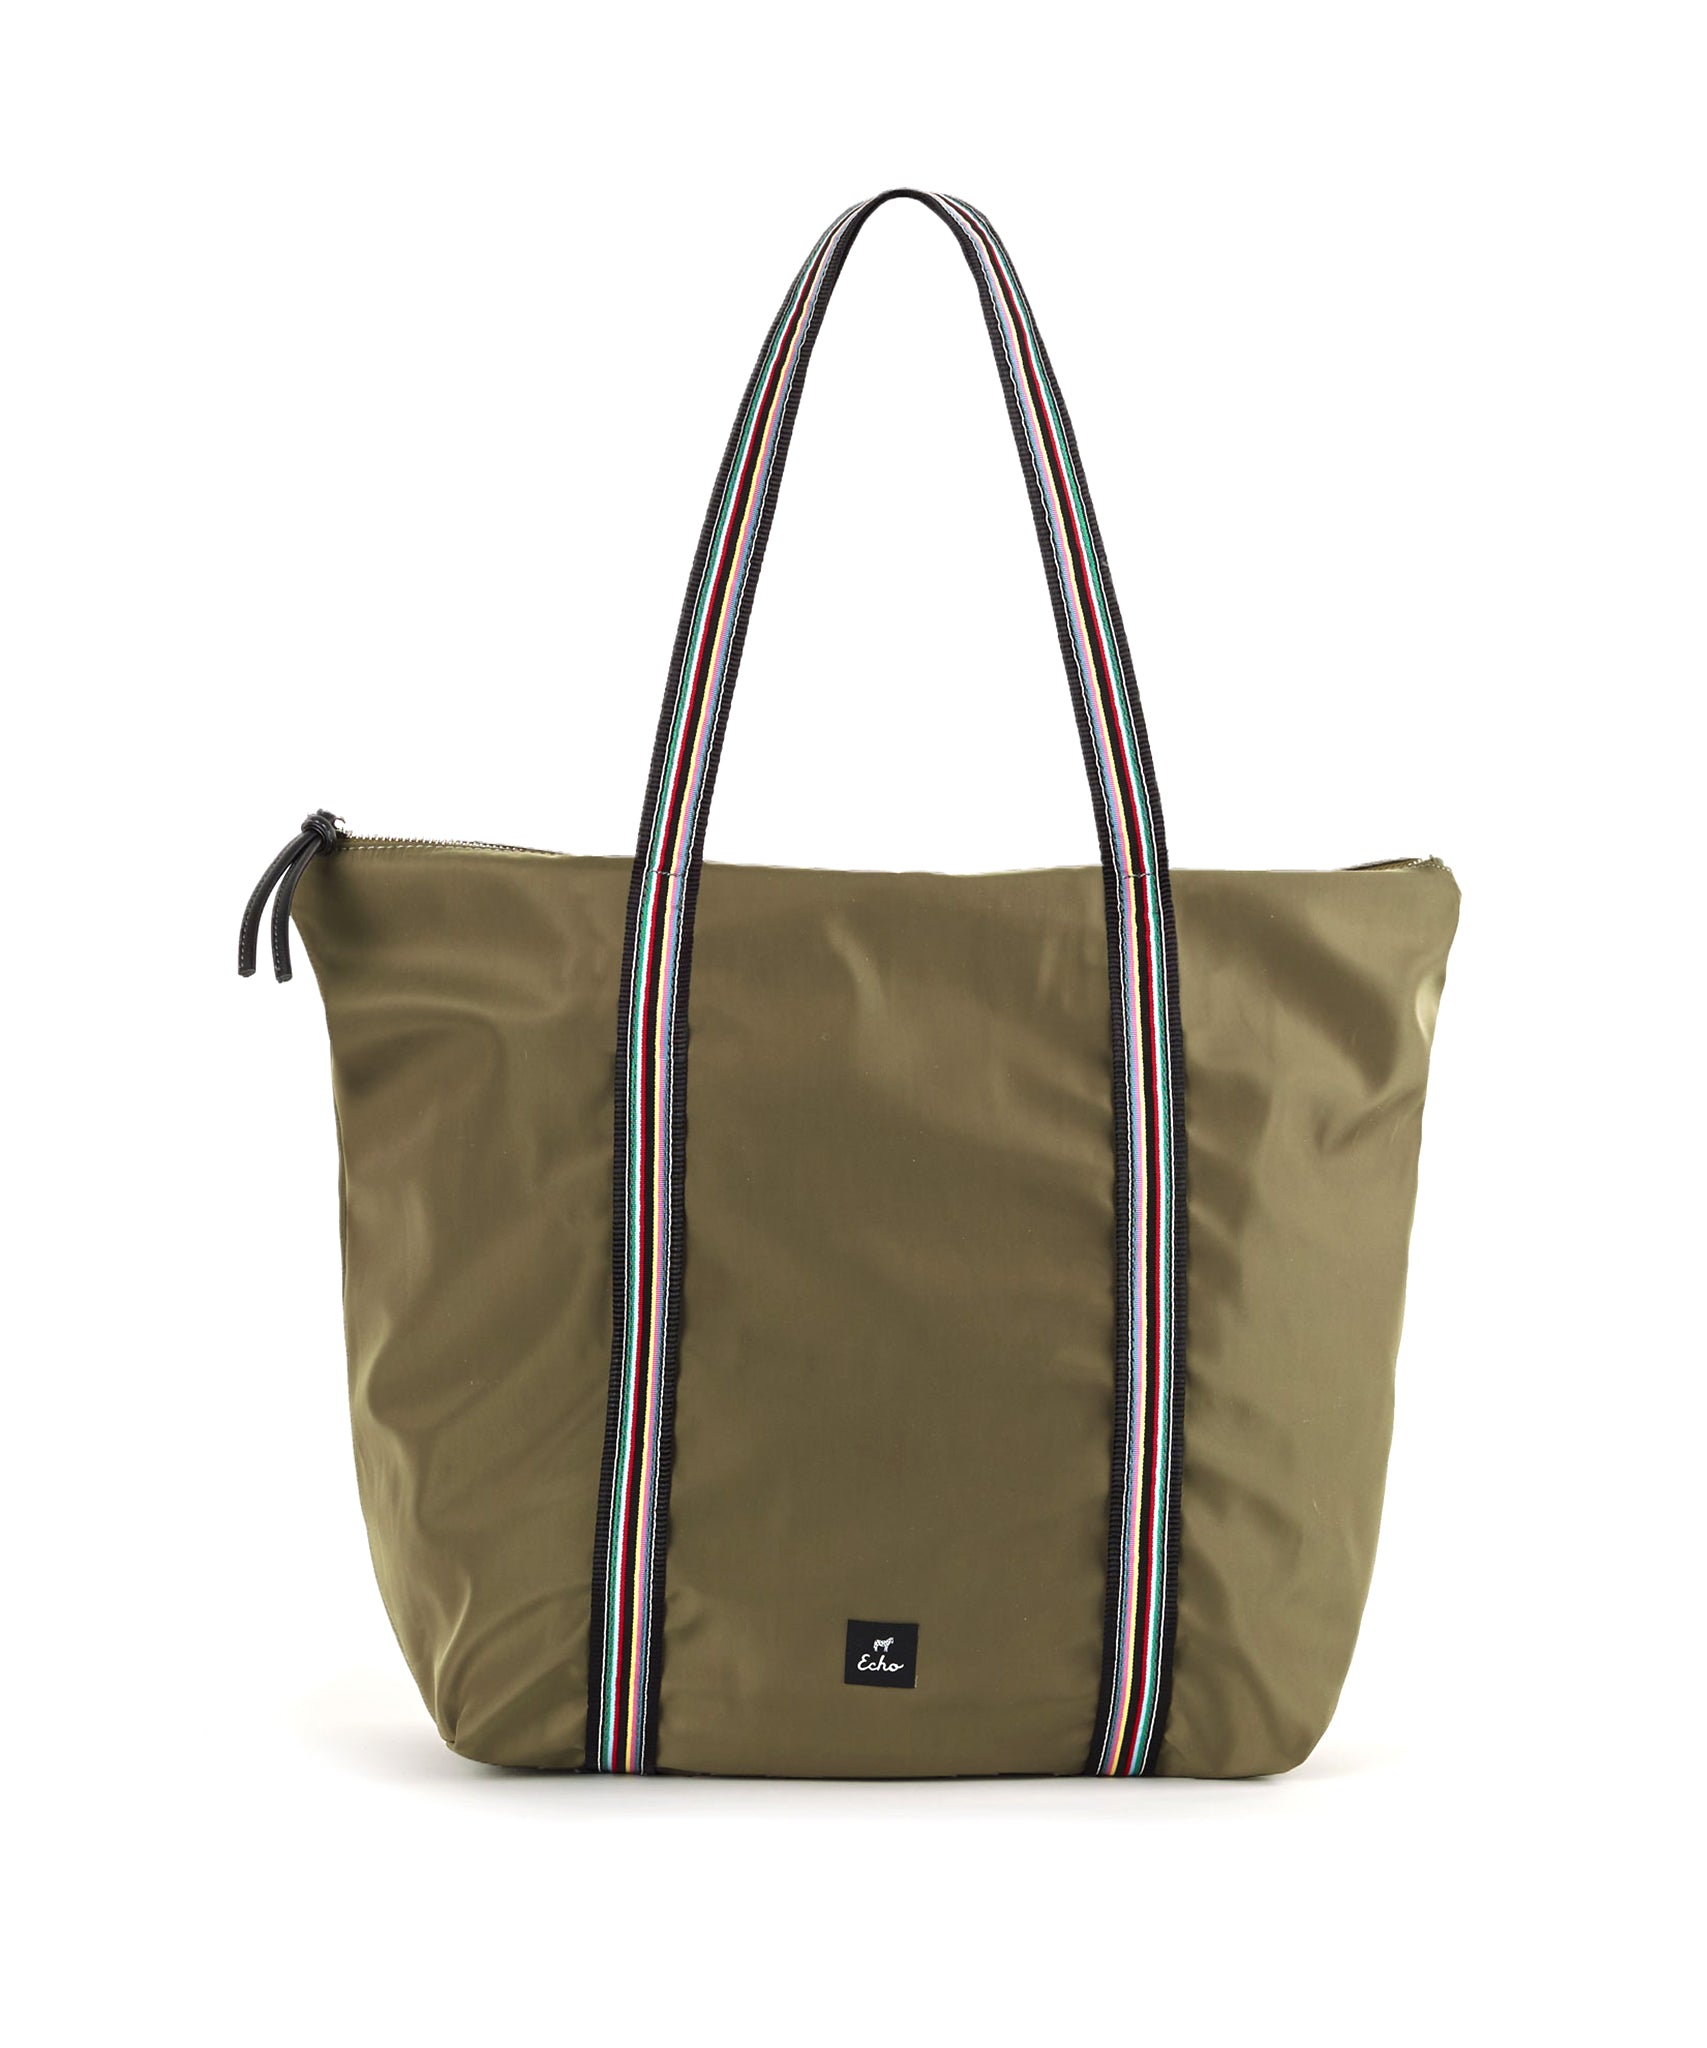 London Tote in color Evergreen